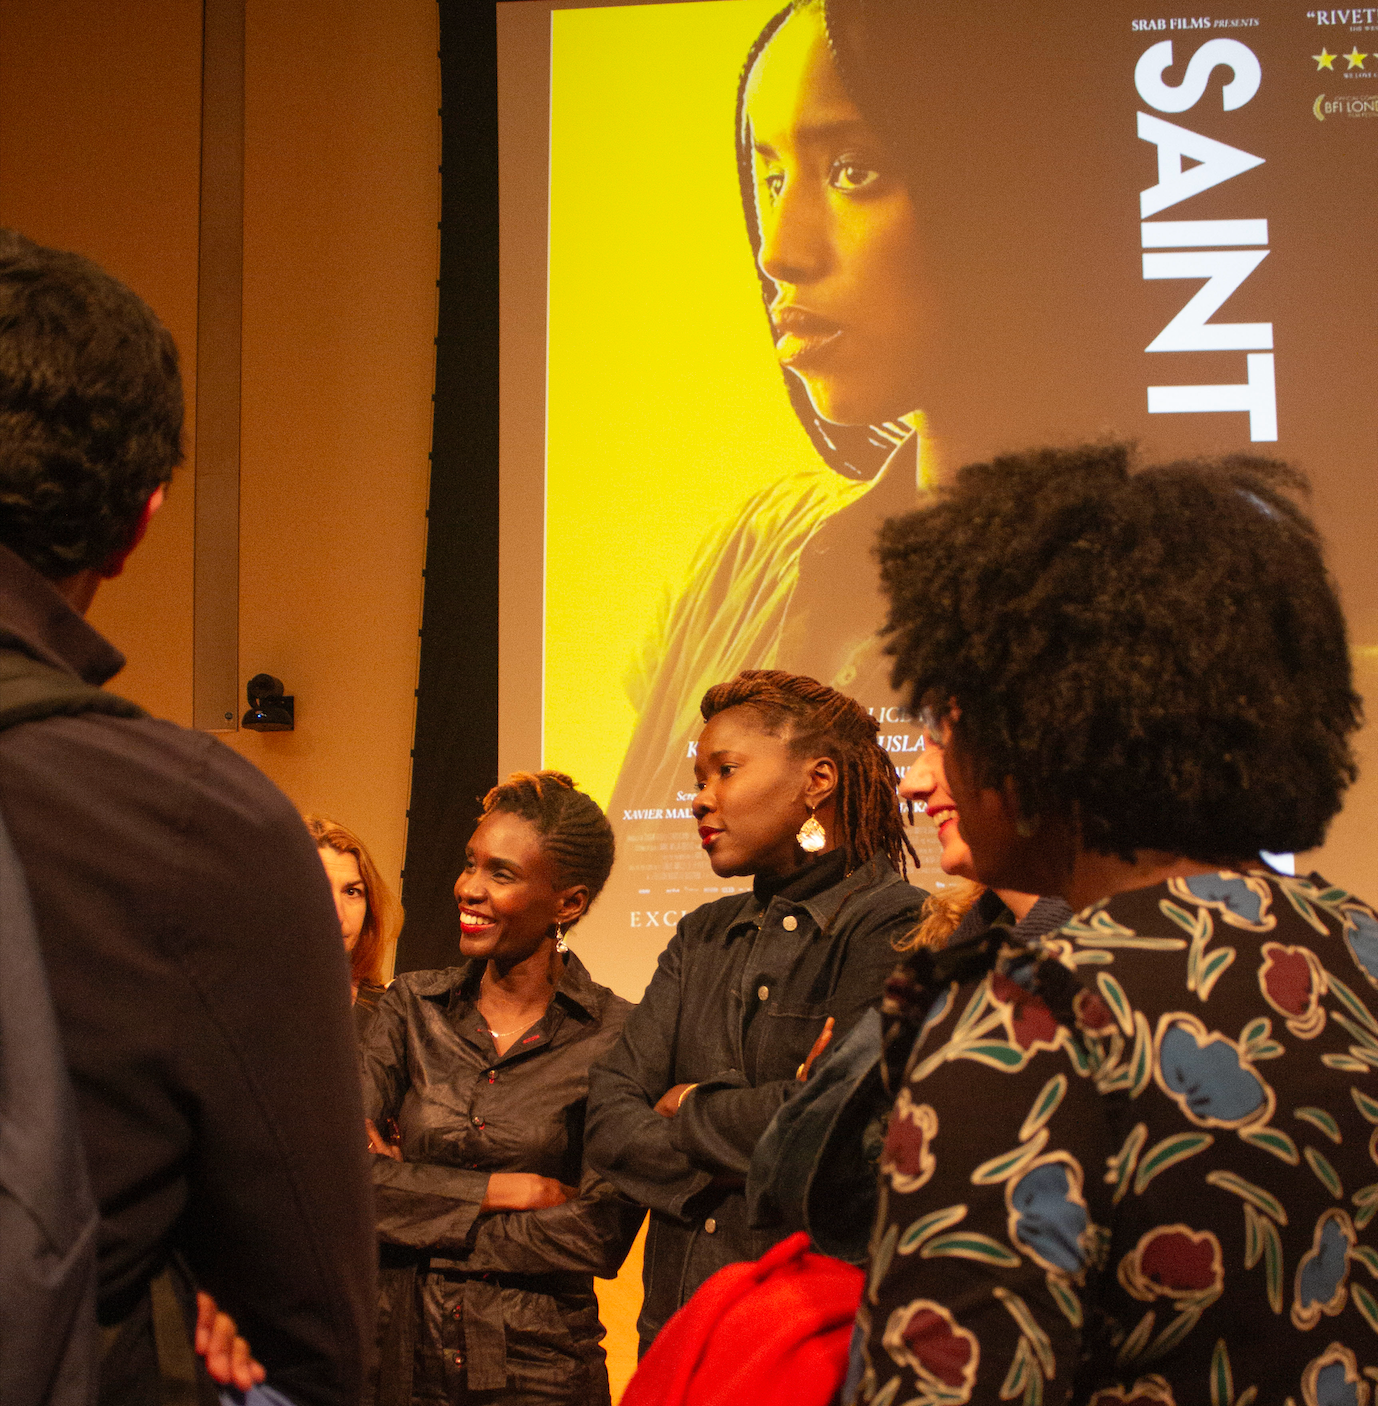 Rokhaya Diallo and Alice Diop stand next to each other as audience member converse with them.